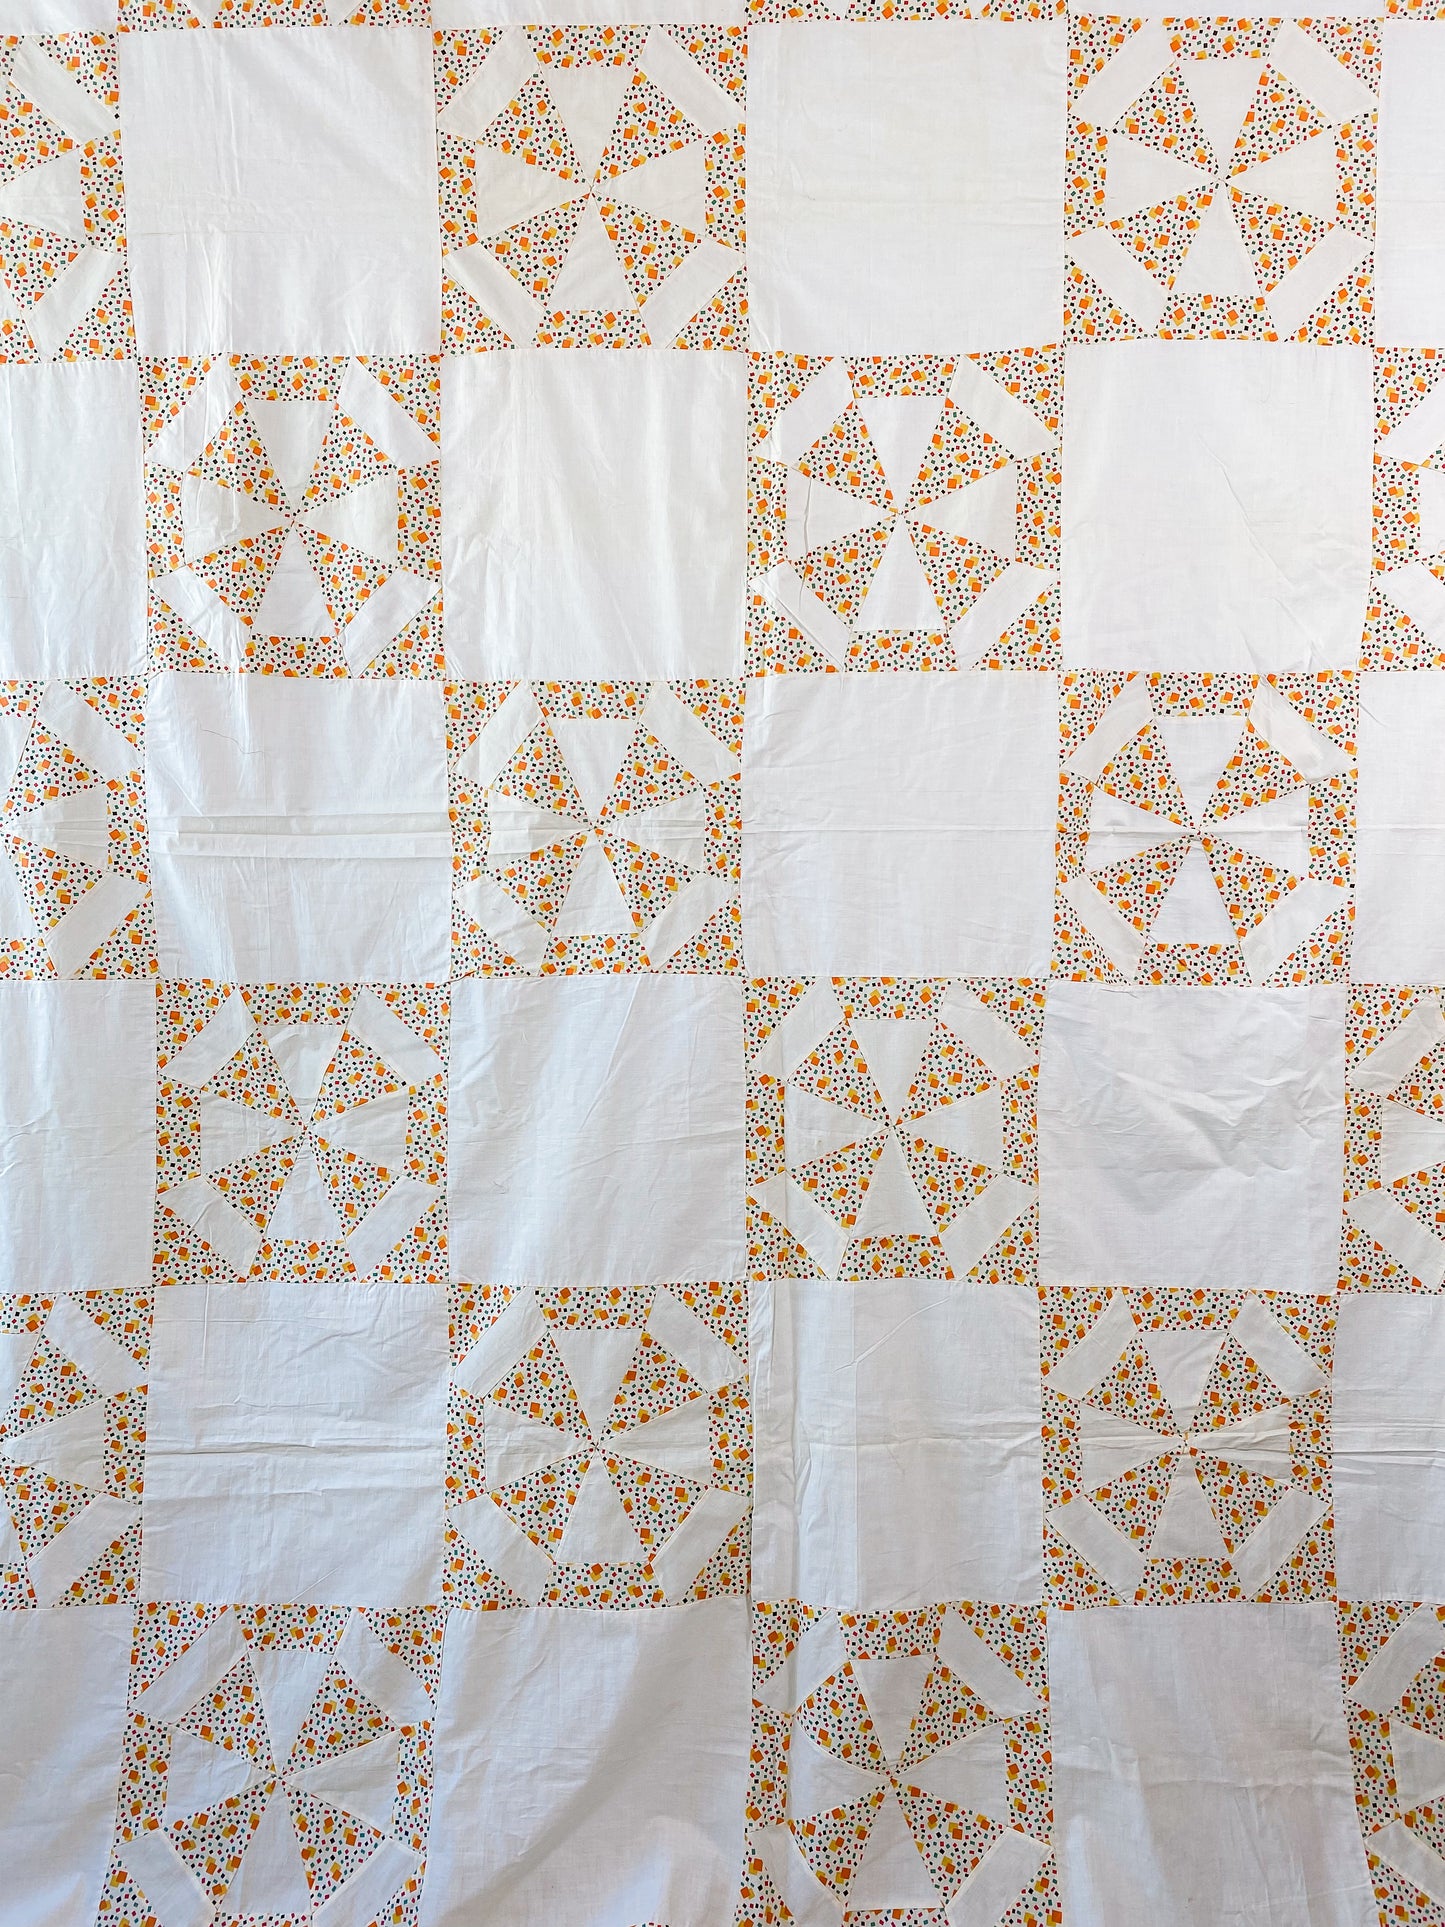 Vintage Spider Web Unfinished Geometric Orange and Yellow Quilt TOP